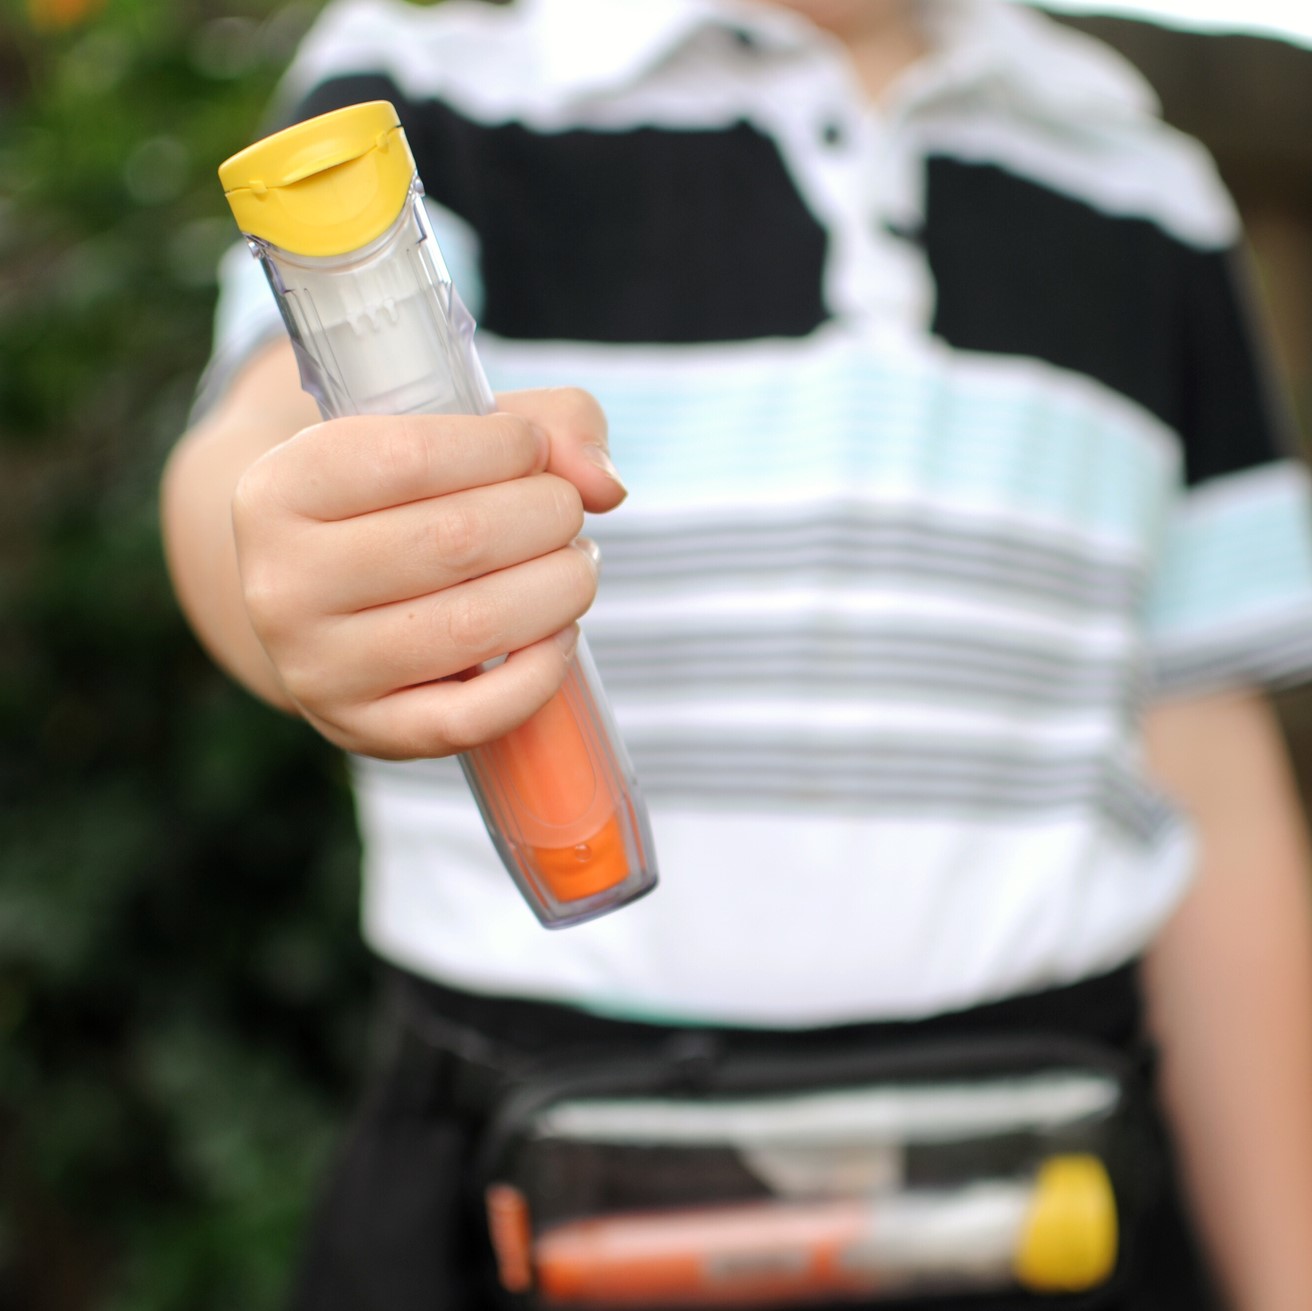 Child holding an epinephrine auto-injector, with another one shown in a small pouch around the child's waist.